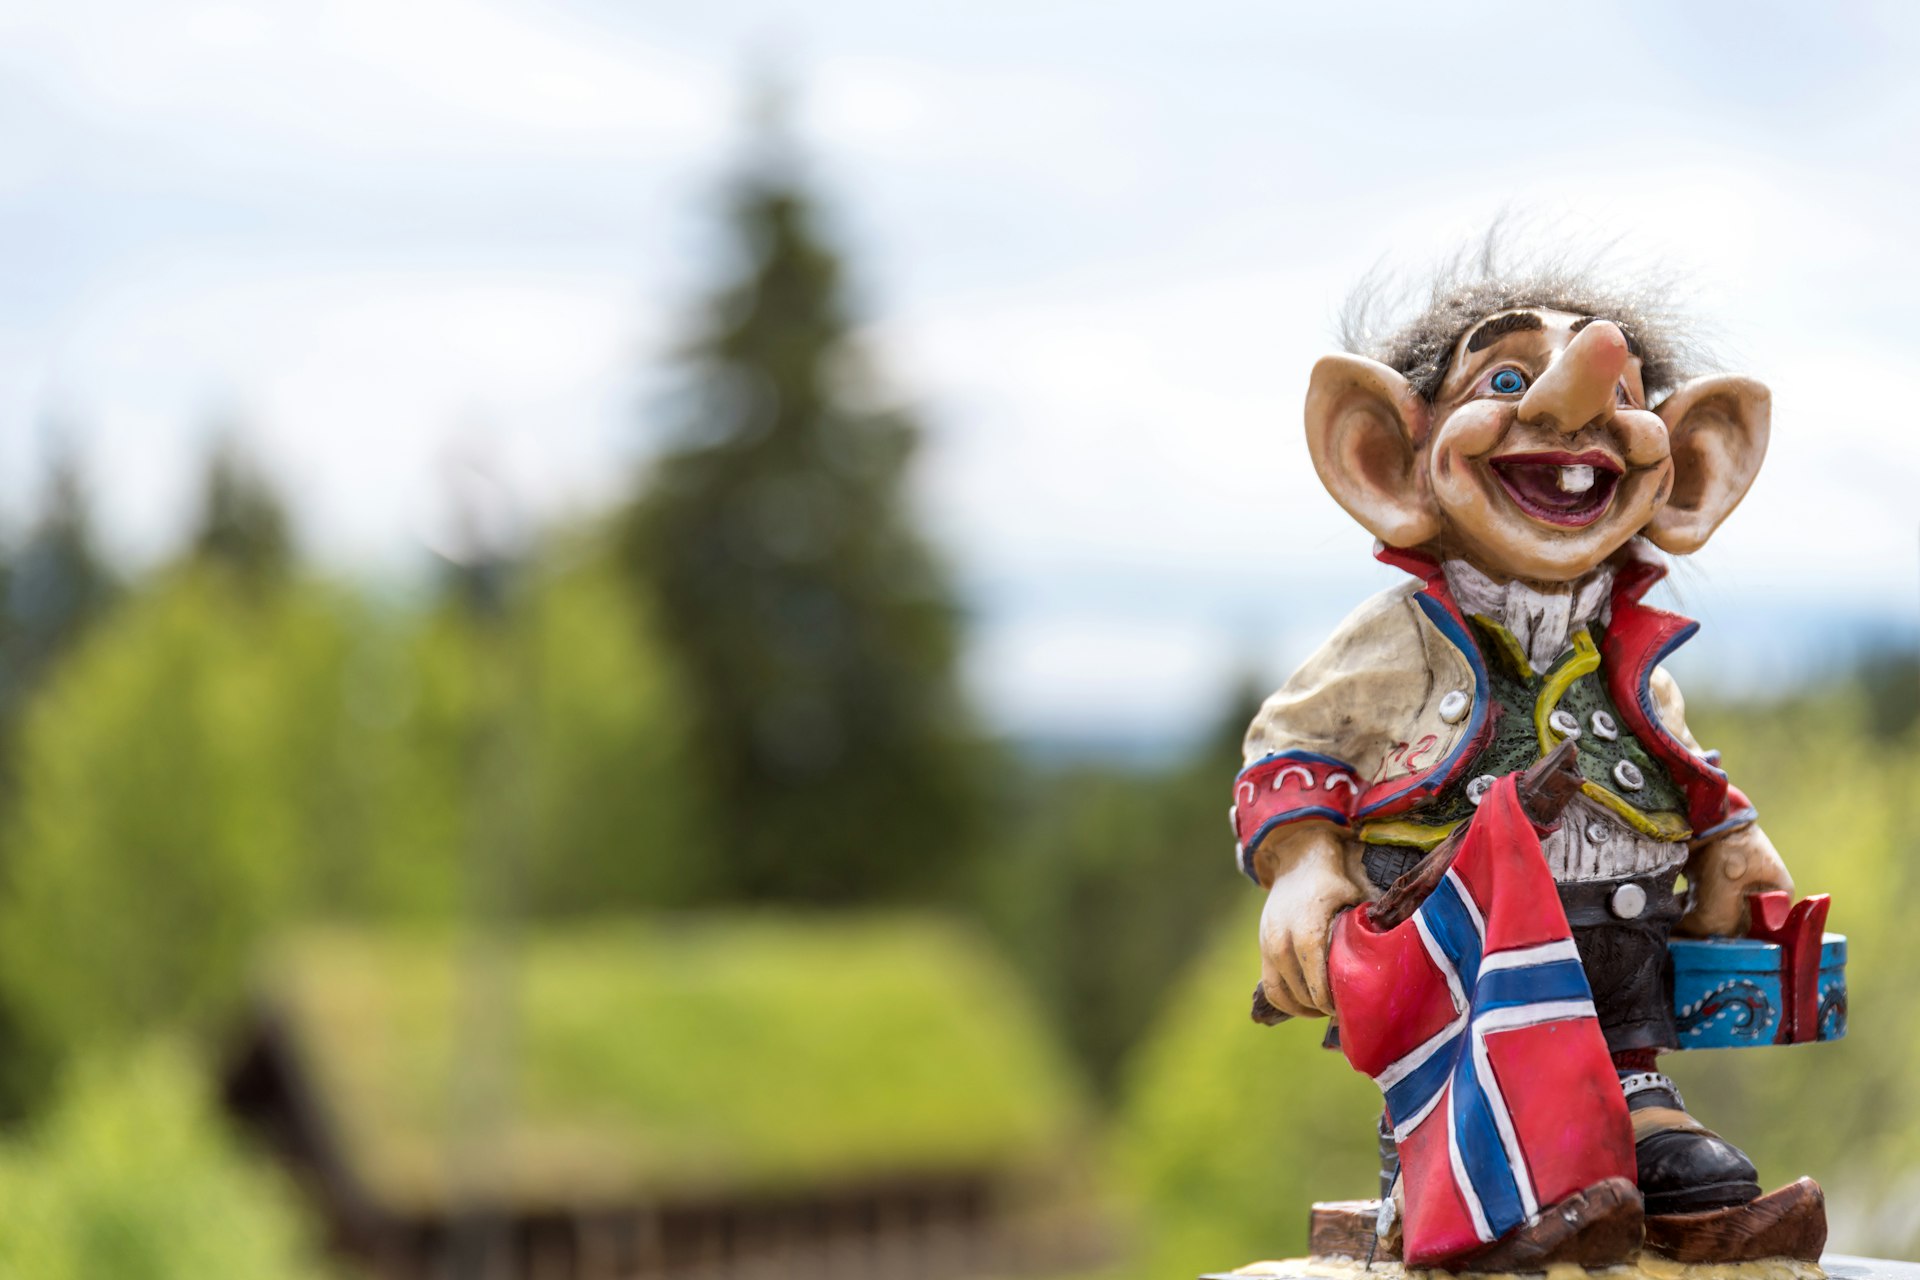 A Norwegian troll statue in the countryside of Norway